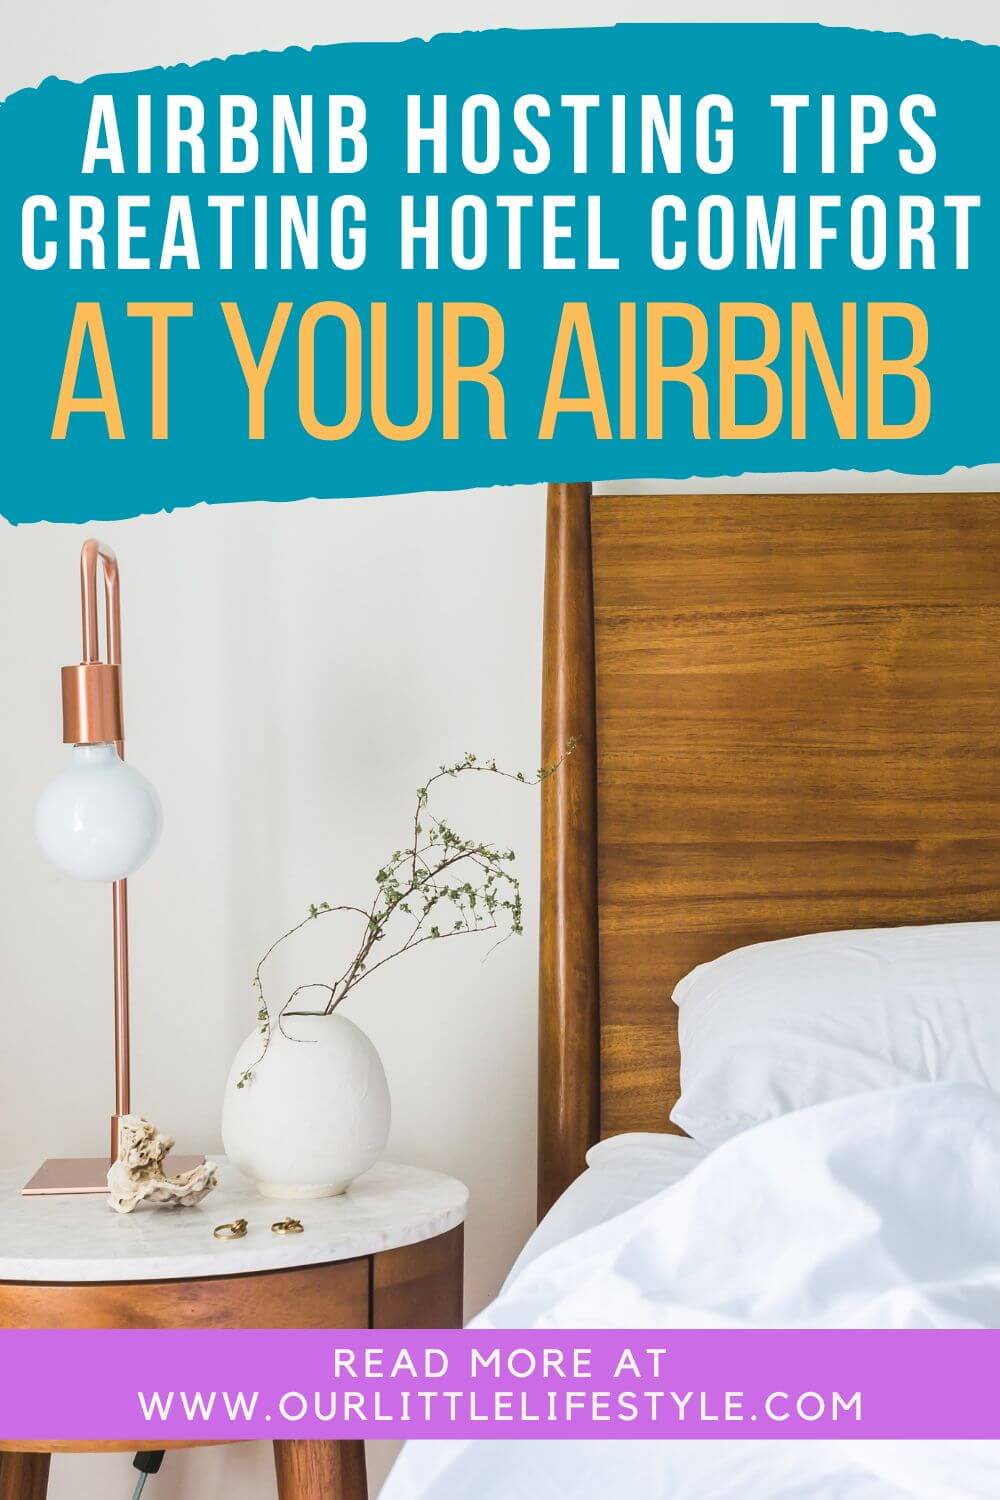 AIrbnb Hosting Tips to create Hotel VIbes